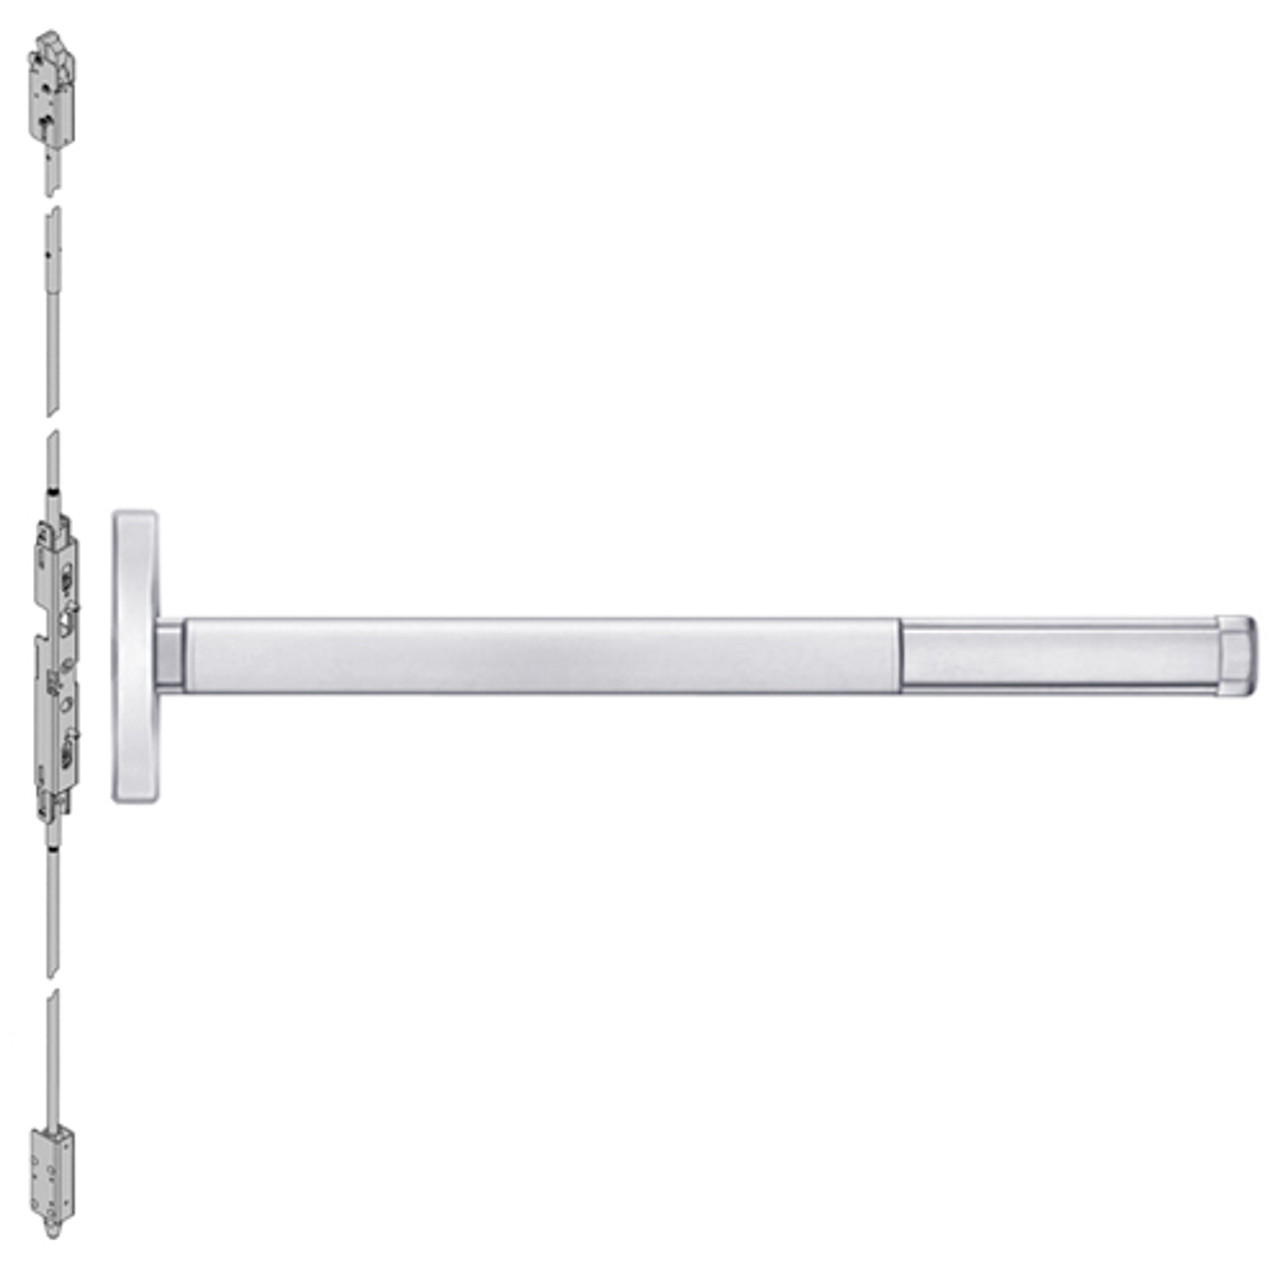 DE2614LBR-625-48 PHI 2600 Series Concealed Vertical Rod Exit Device with Delayed Egress Prepped for Lever Always Active in Bright Chrome Finish